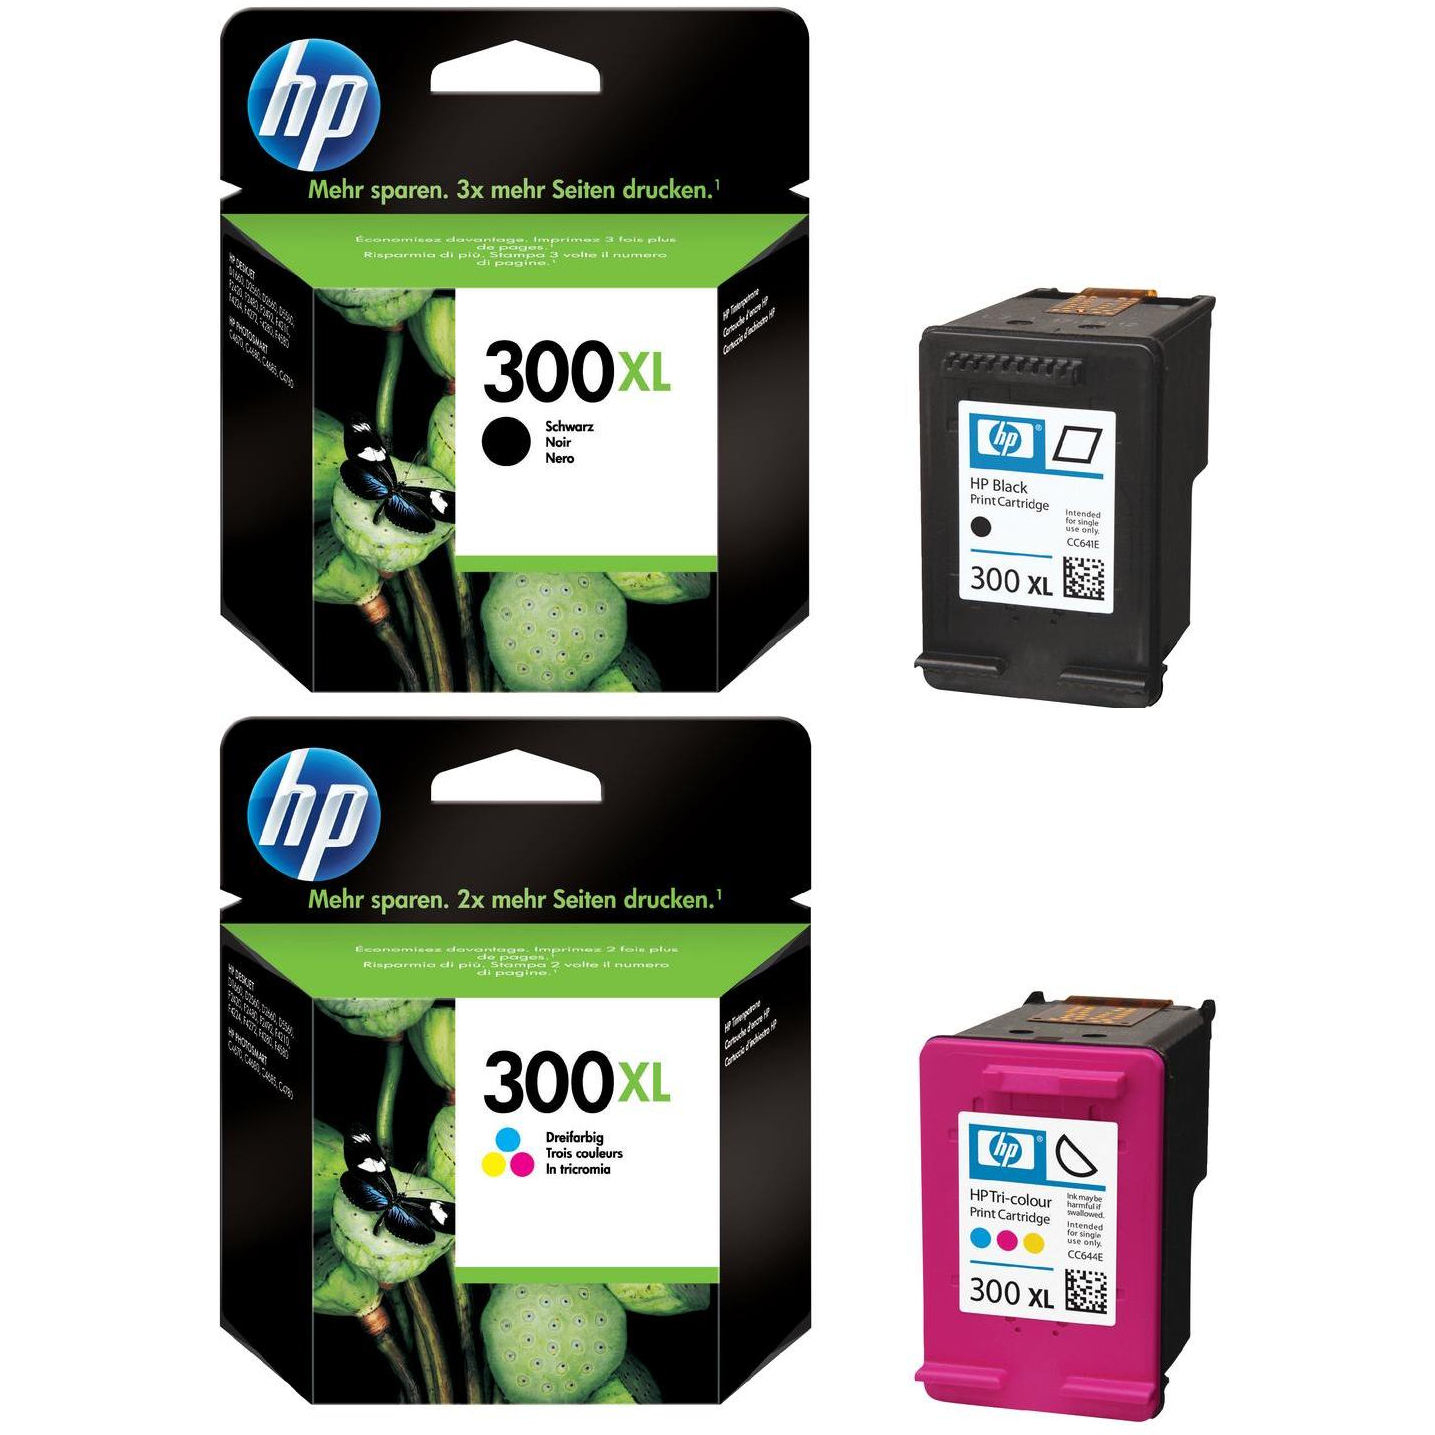 Related to HP PSC 500: HP-300XL-Pack